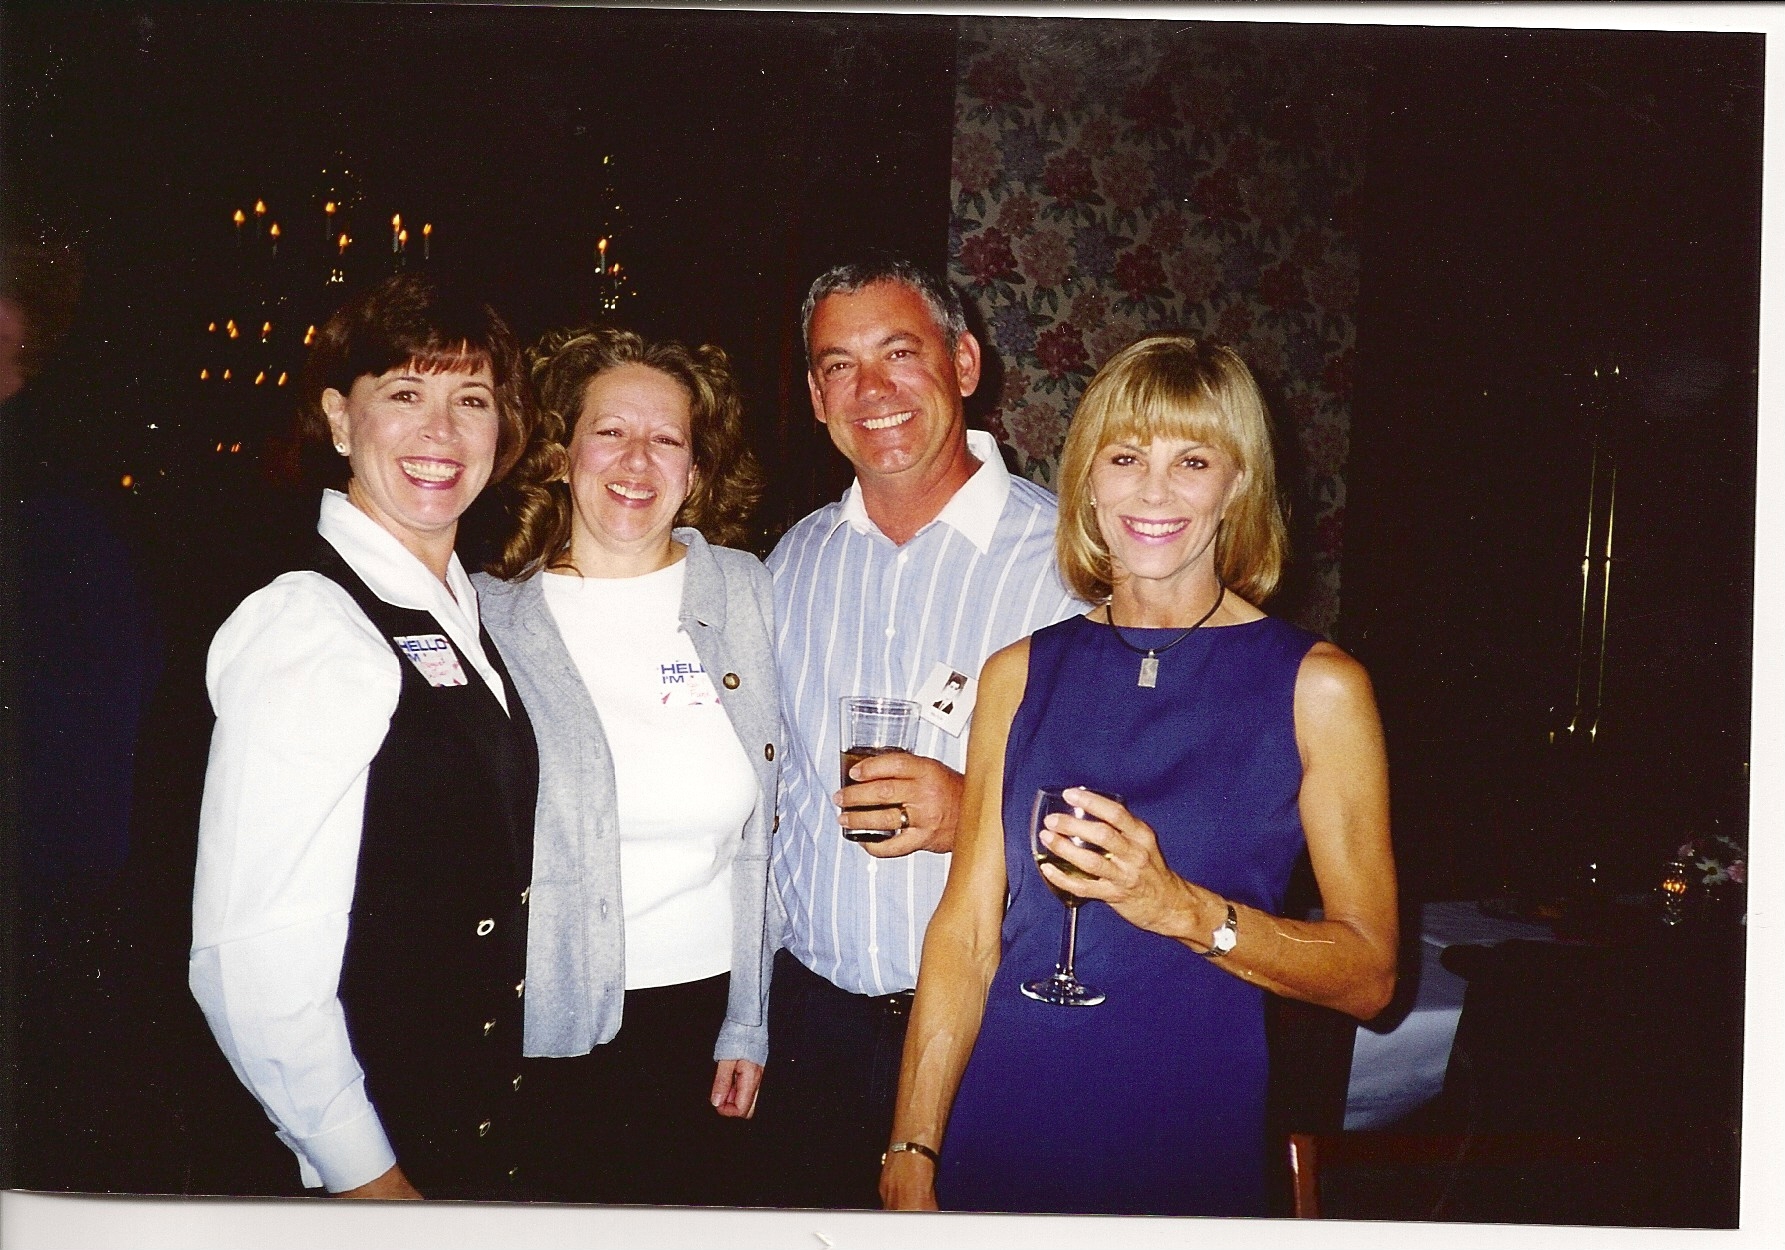 Margaret,  ??, Mike, Pam
1999